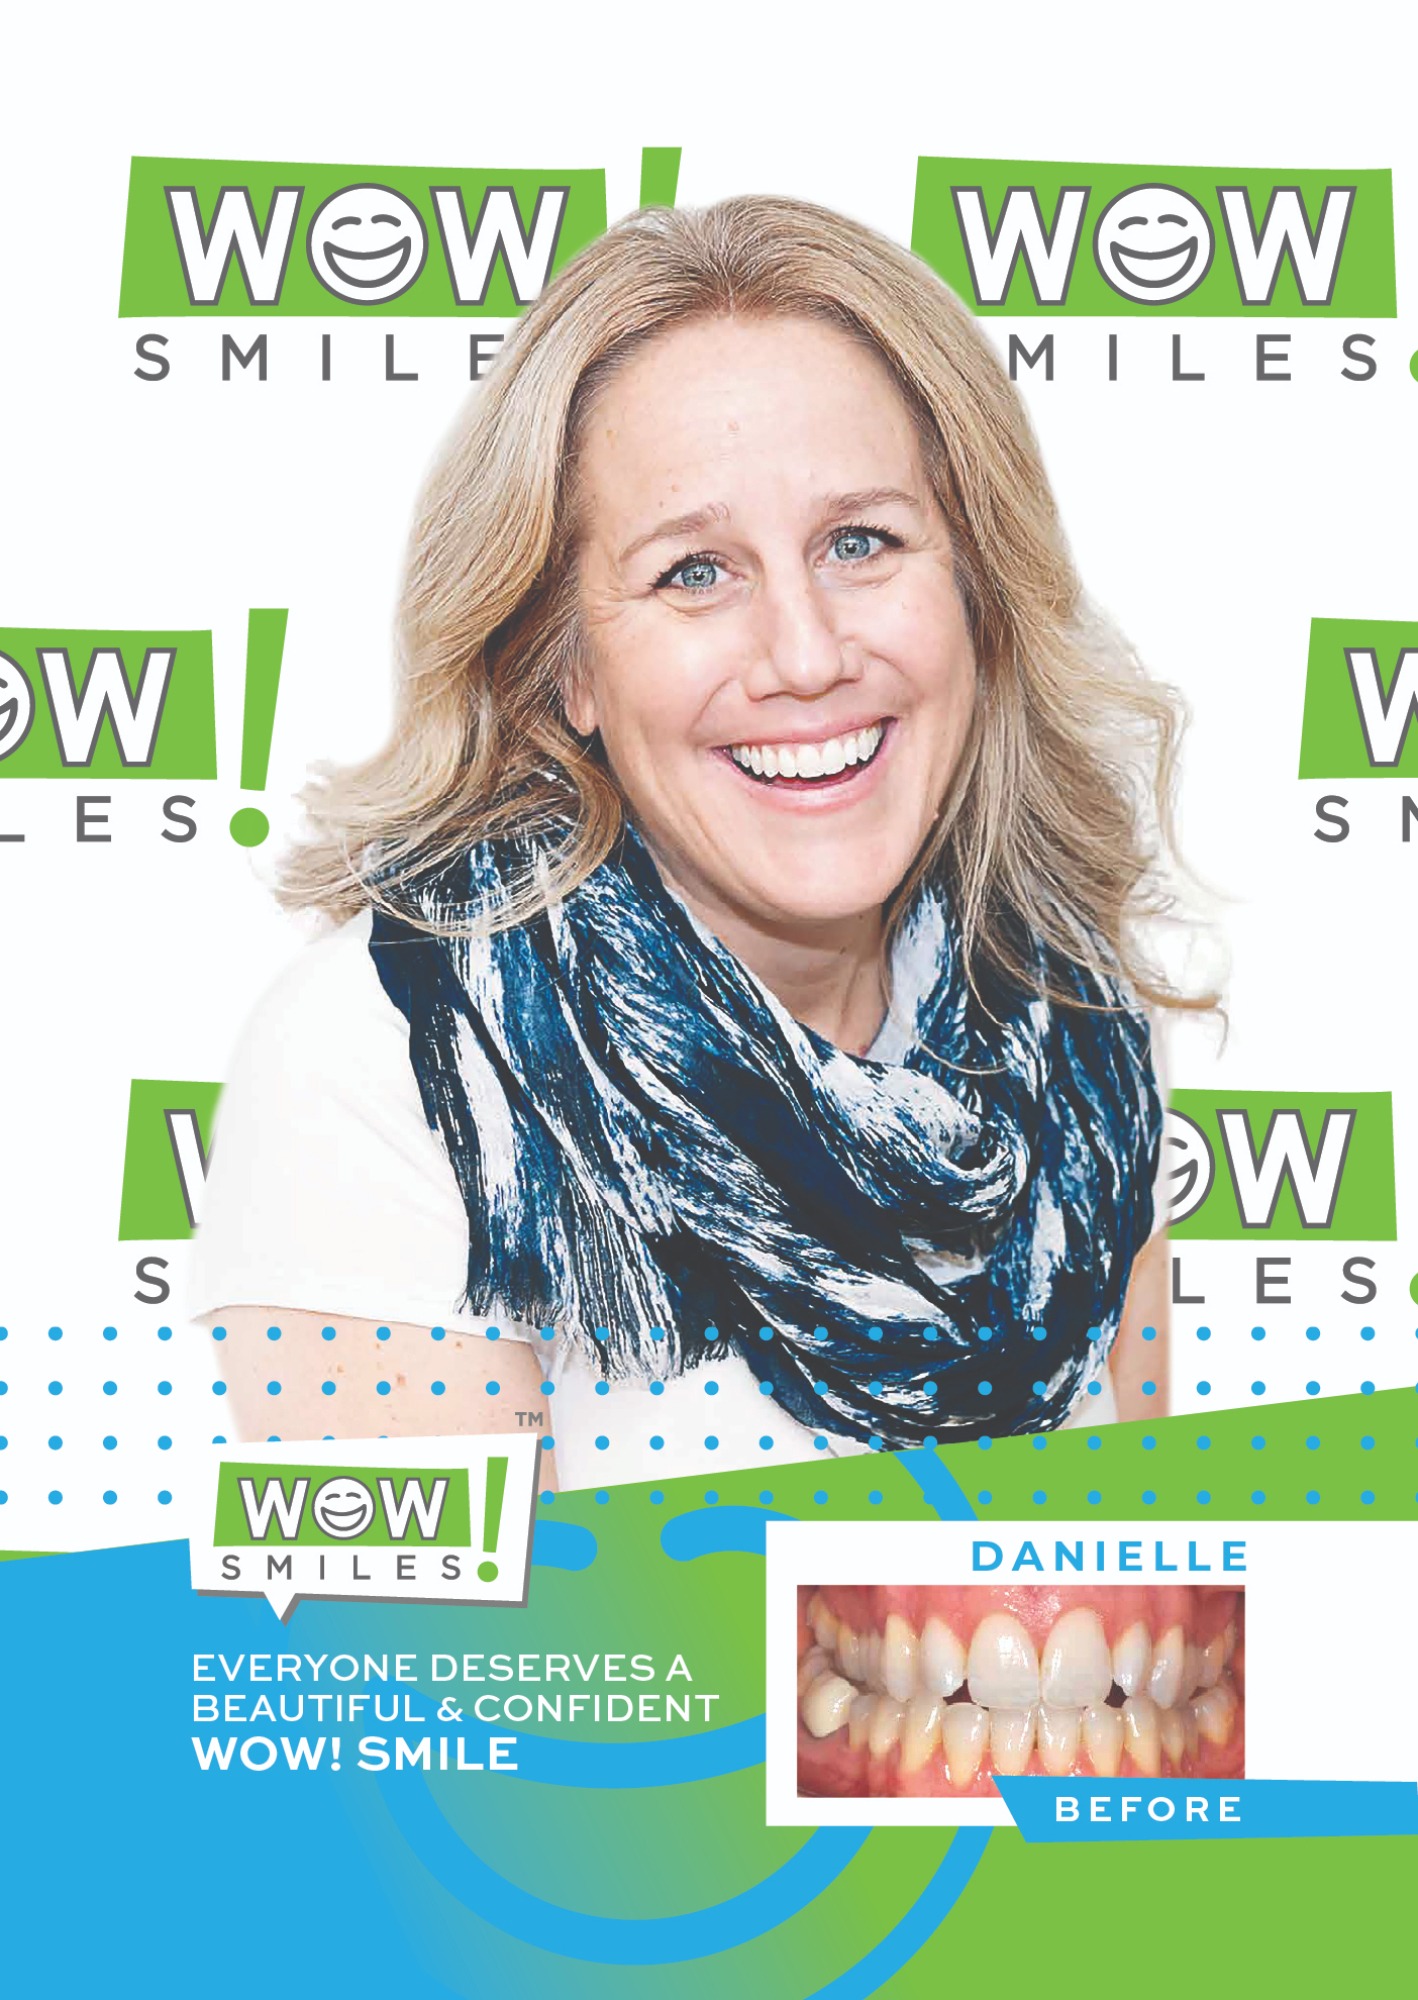 2022-05-10_Wow Smiles_Before and After Posters_Danielle_CC-01